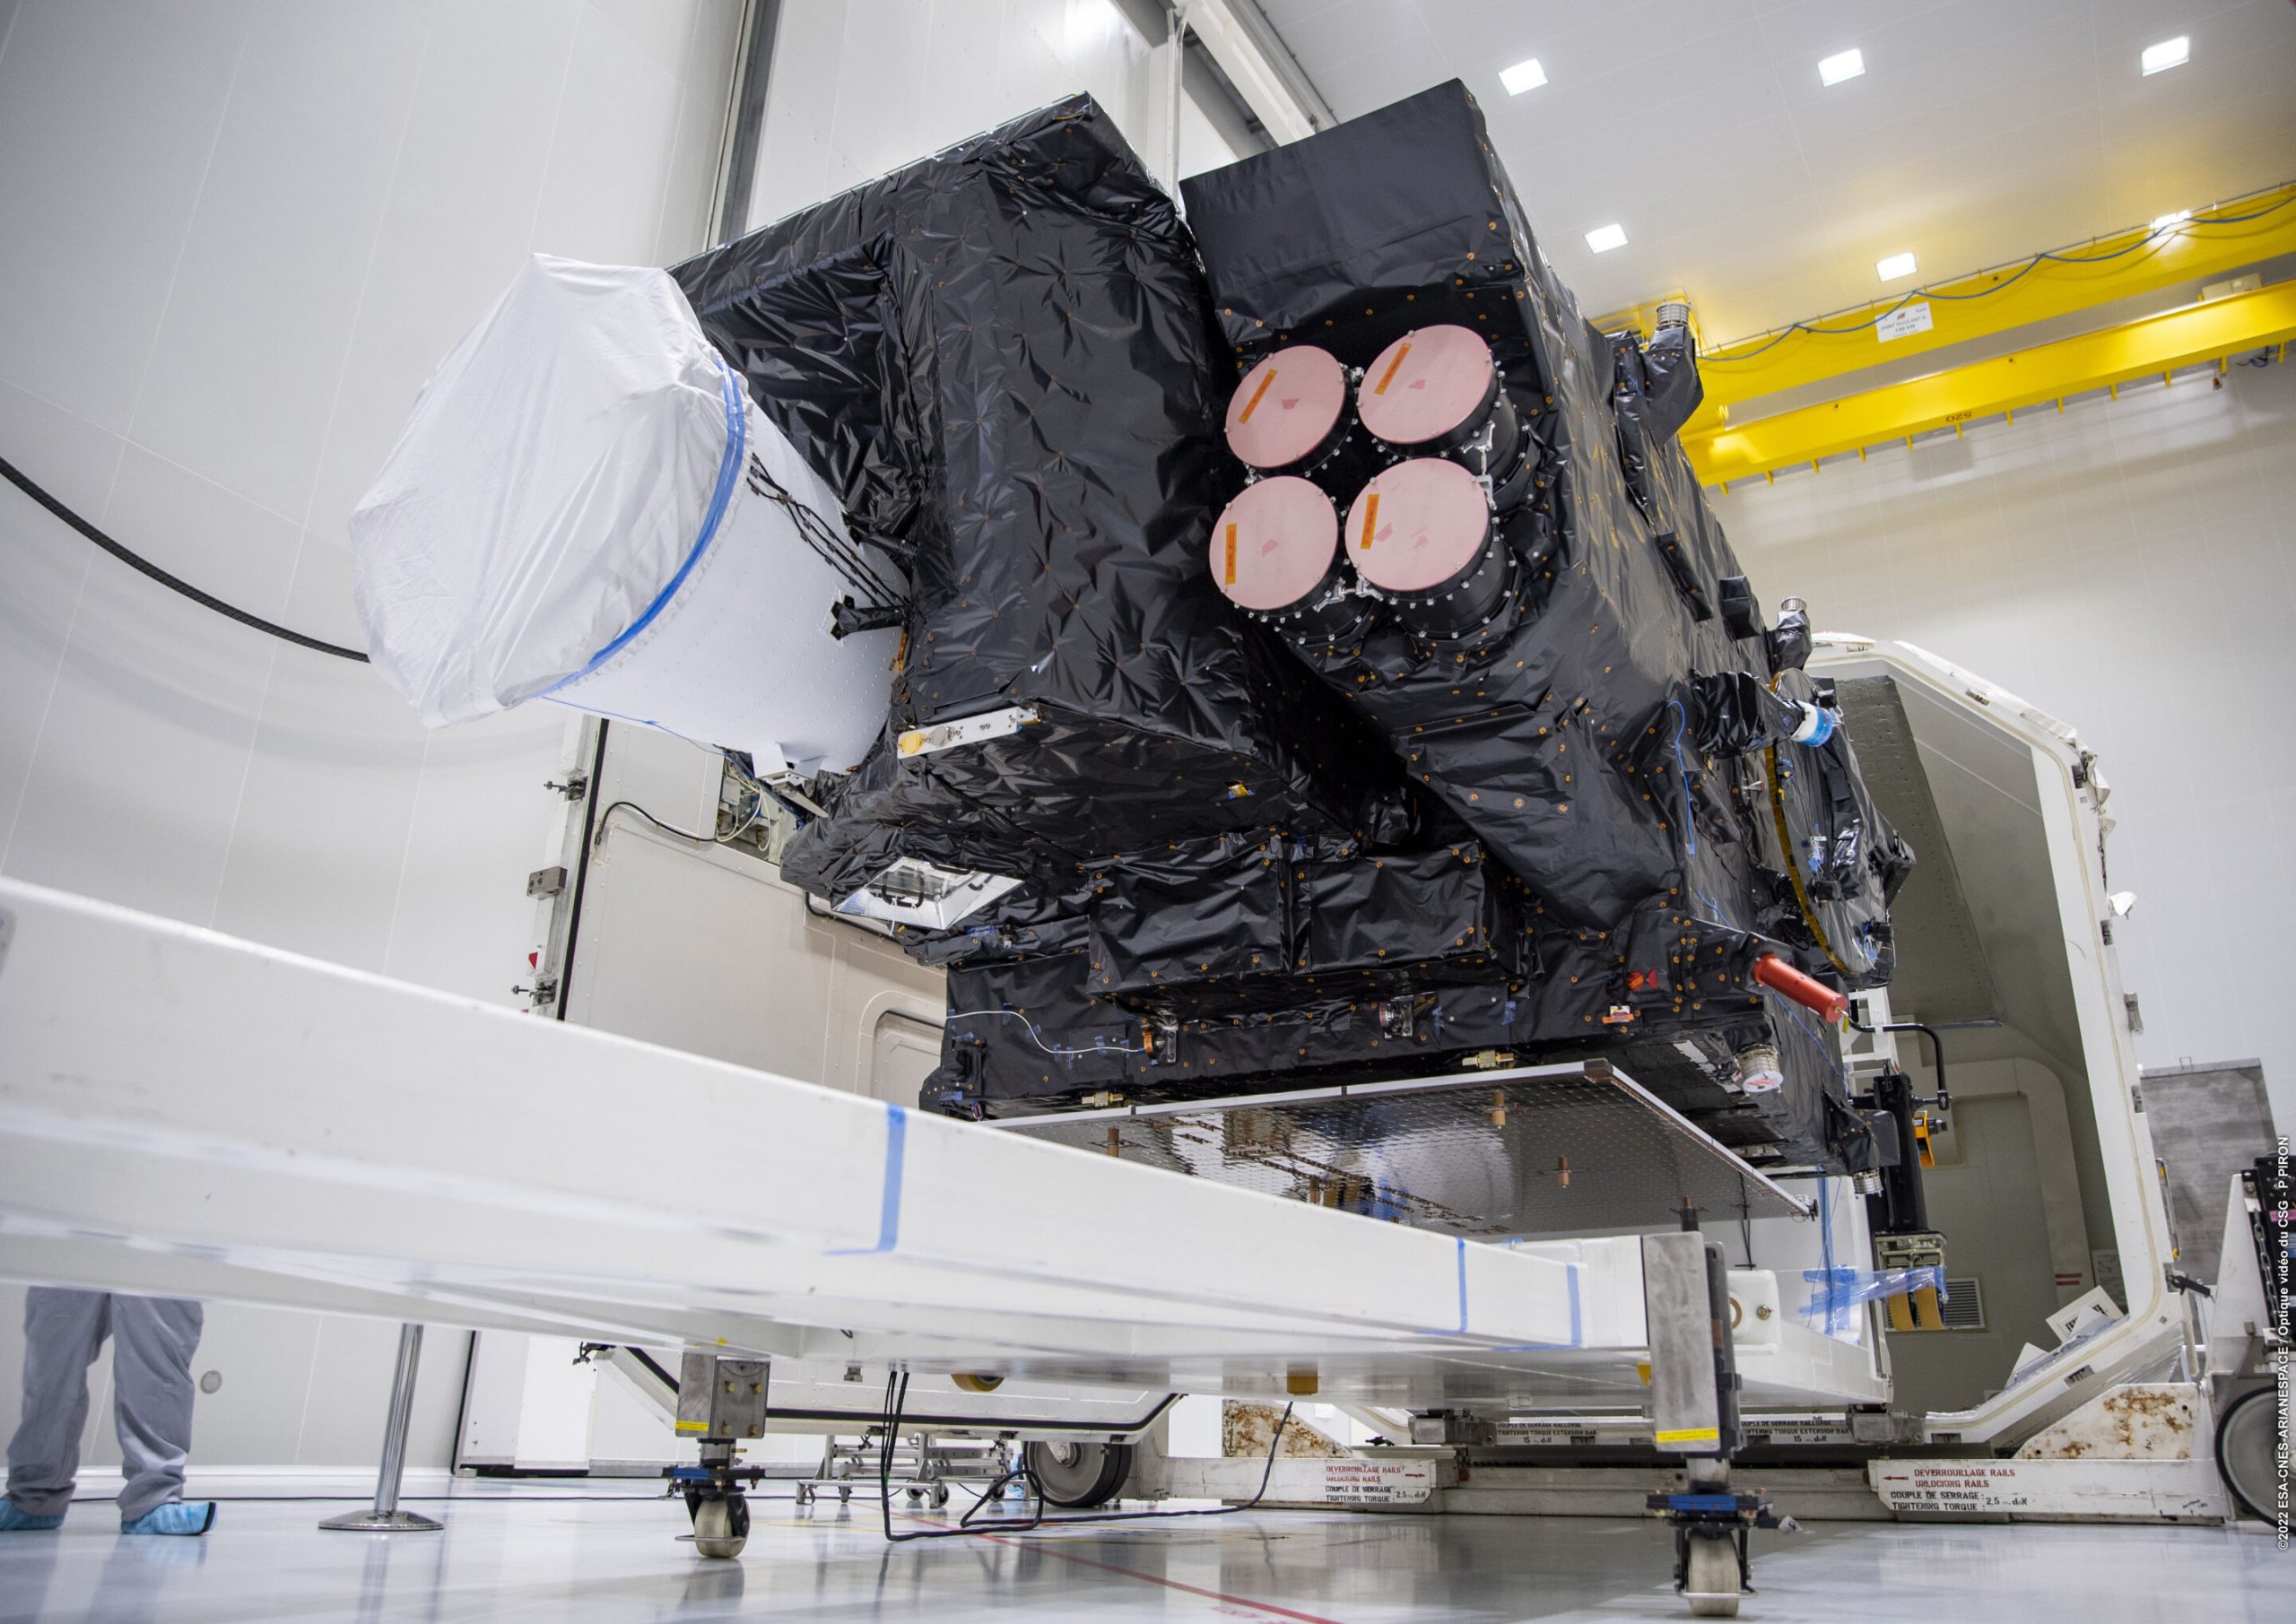 Europe's newest weather satellite arrives at the launch site